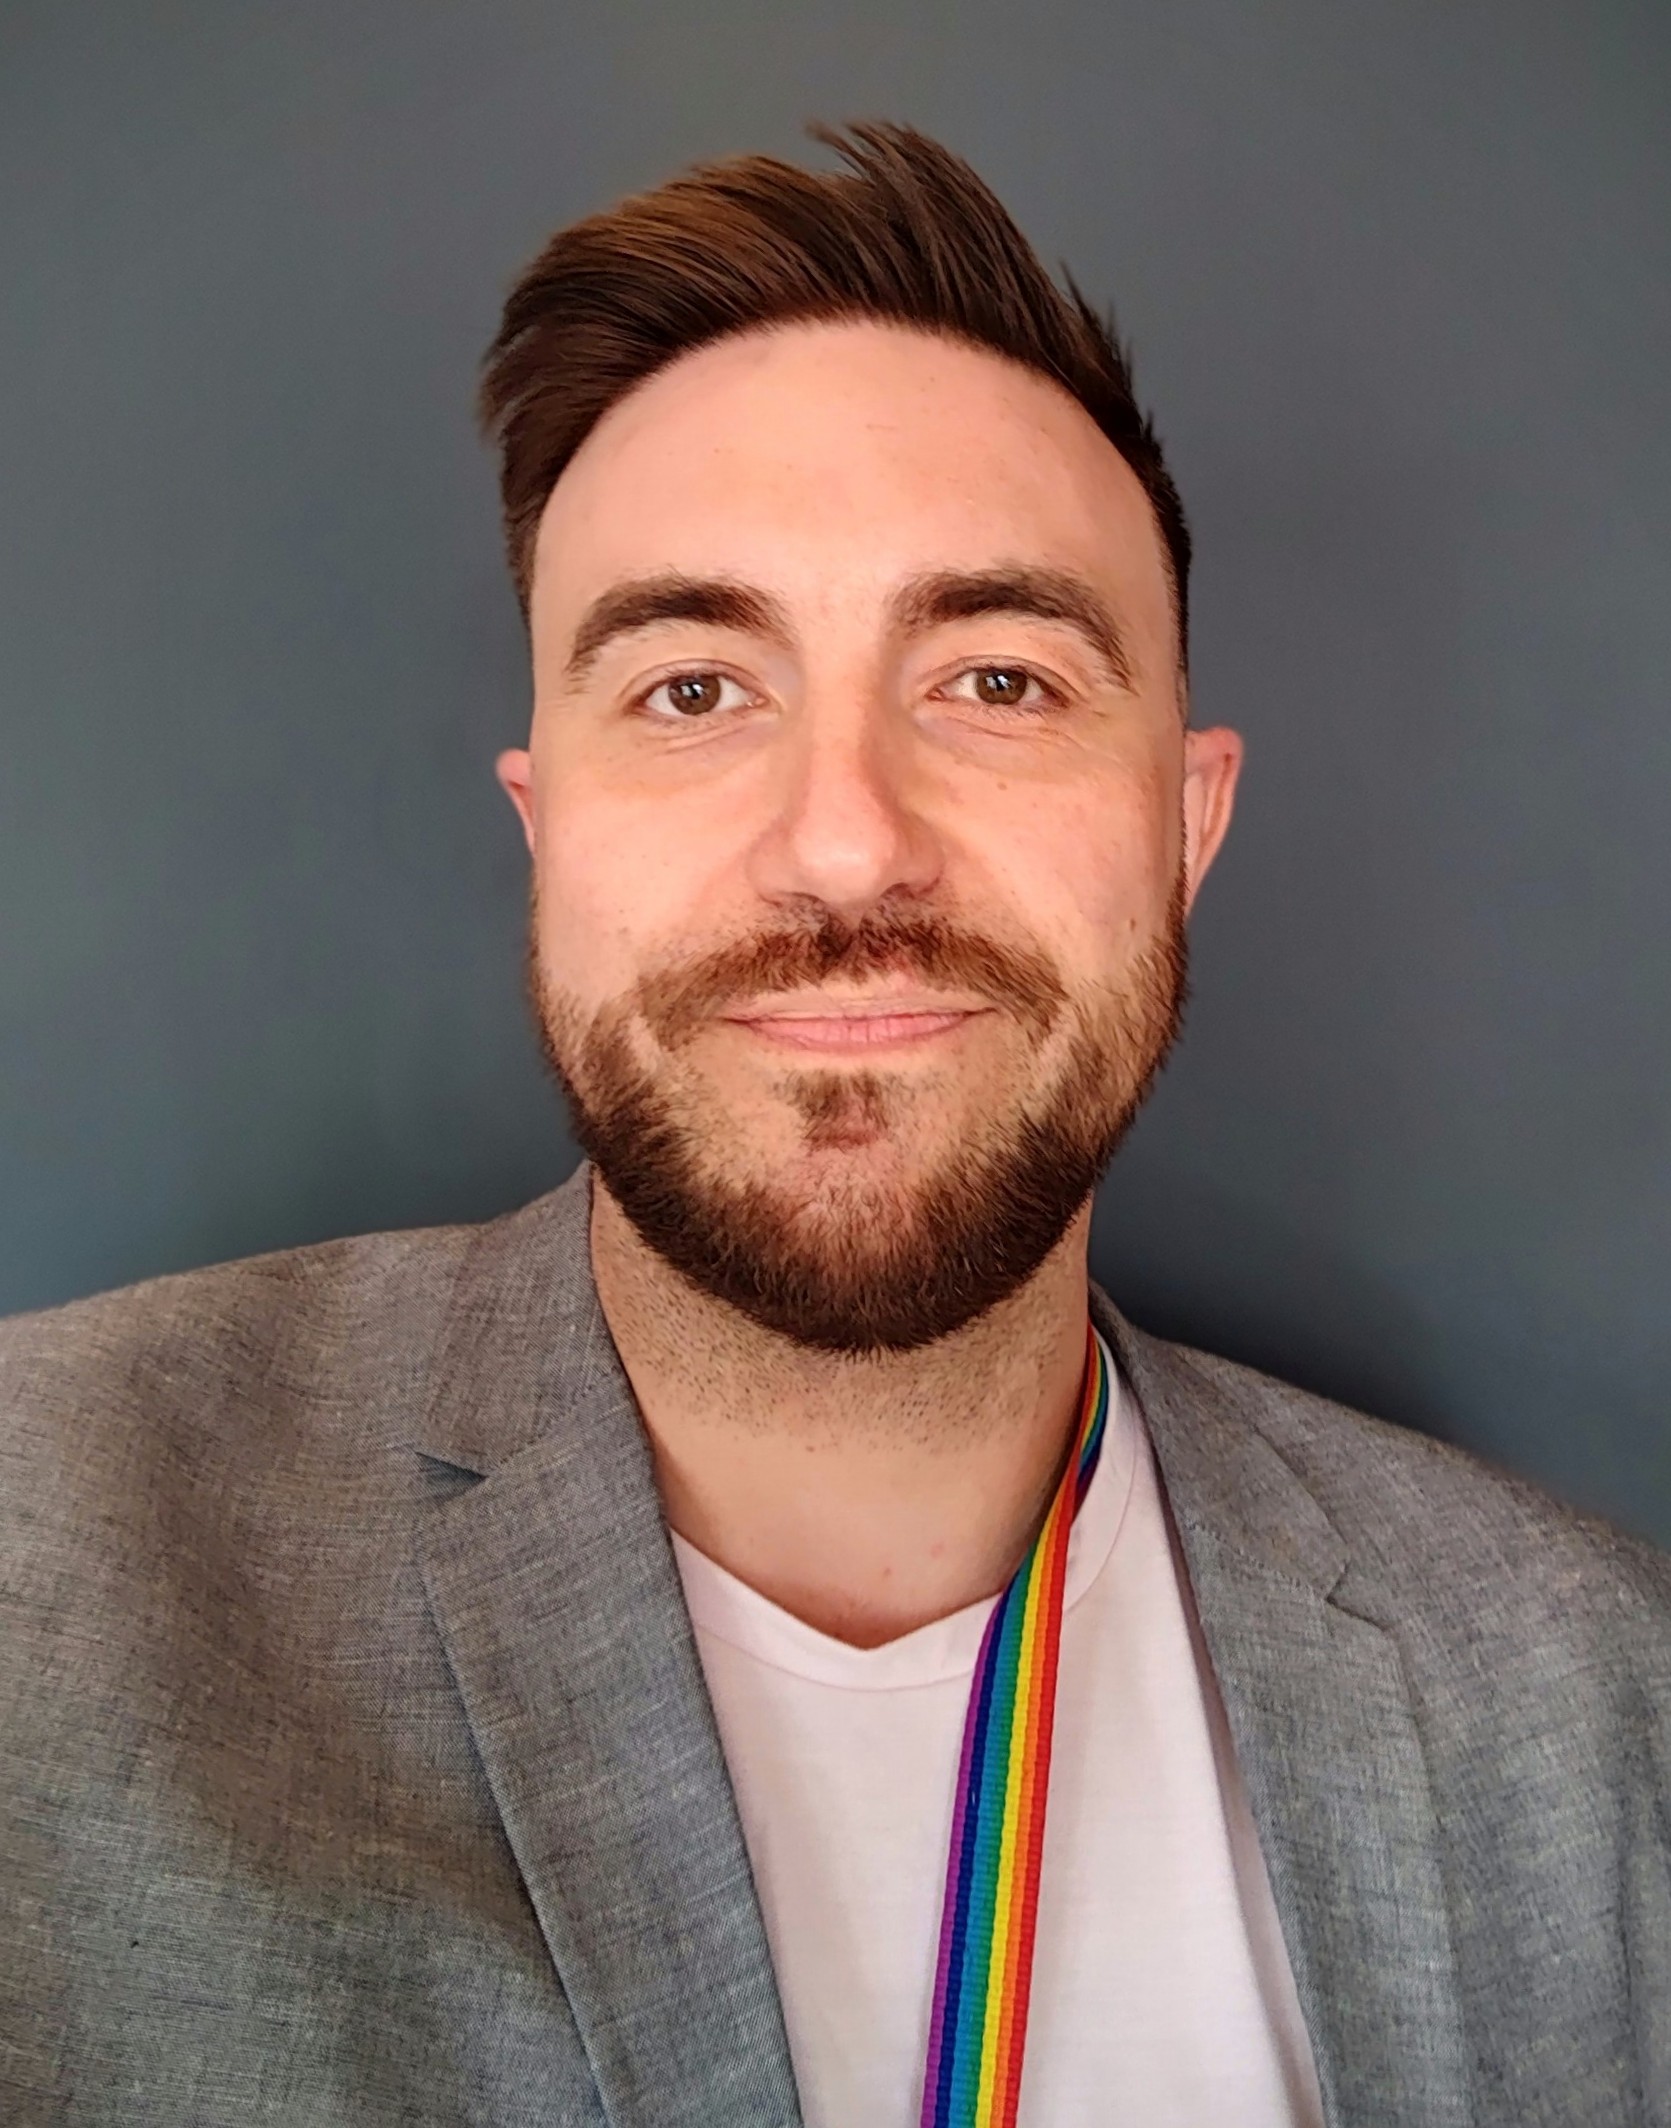 HR at Nottingham Support Office and Celebrating Pride – Richard’s Story